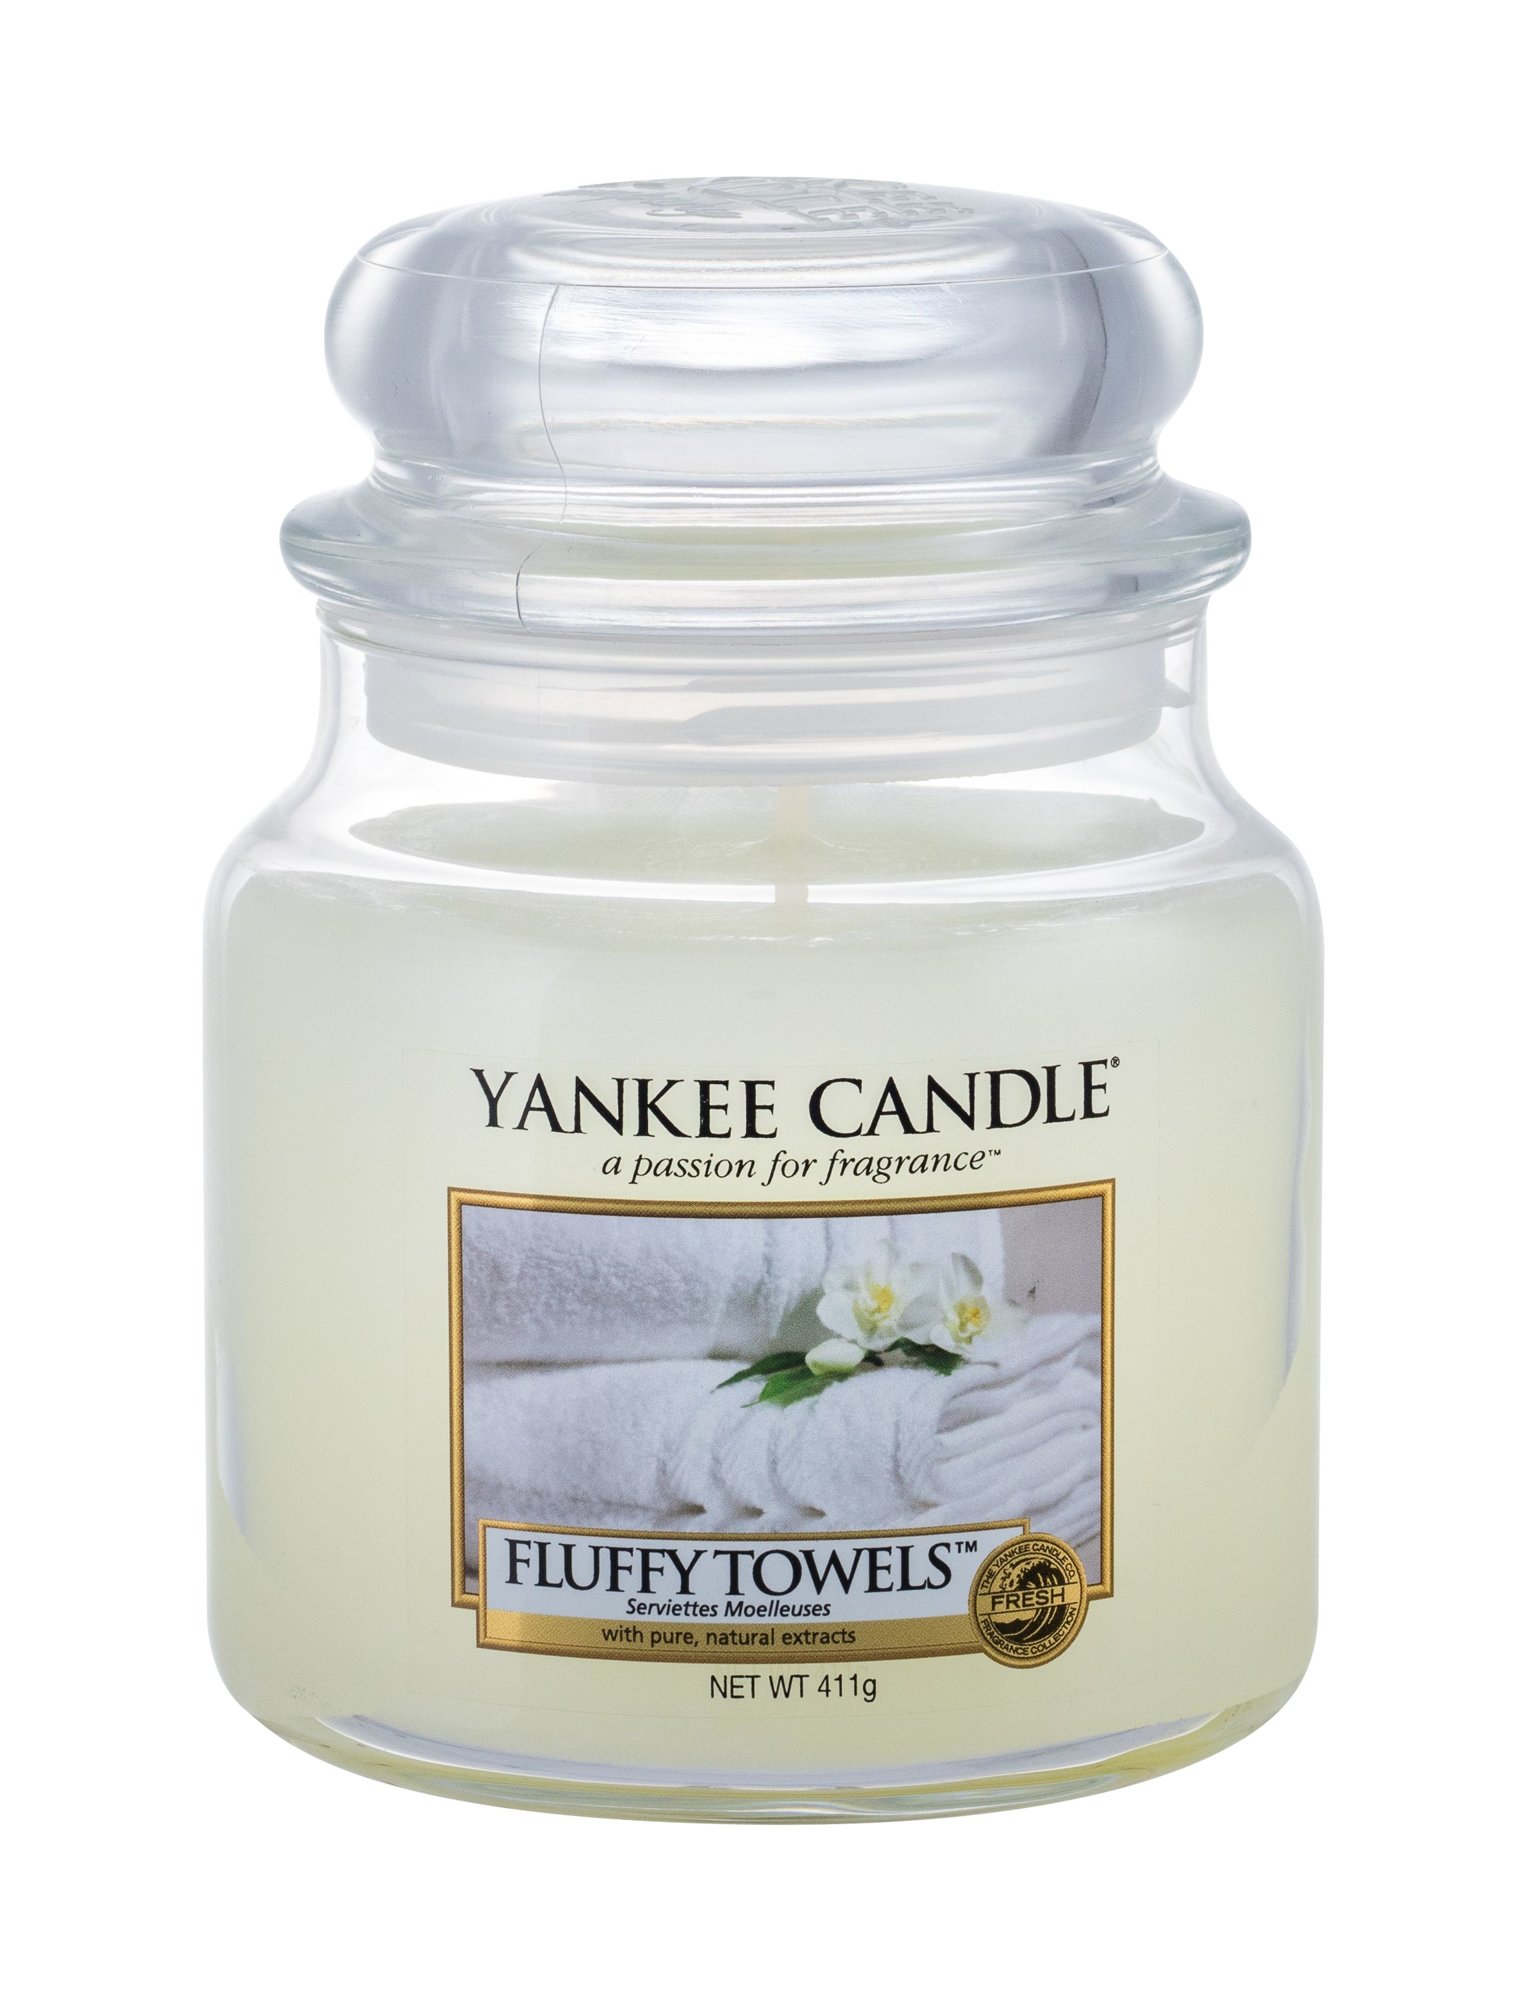 Yankee Candle Fluffy Towels 411g Kvepalai Unisex Scented Candle